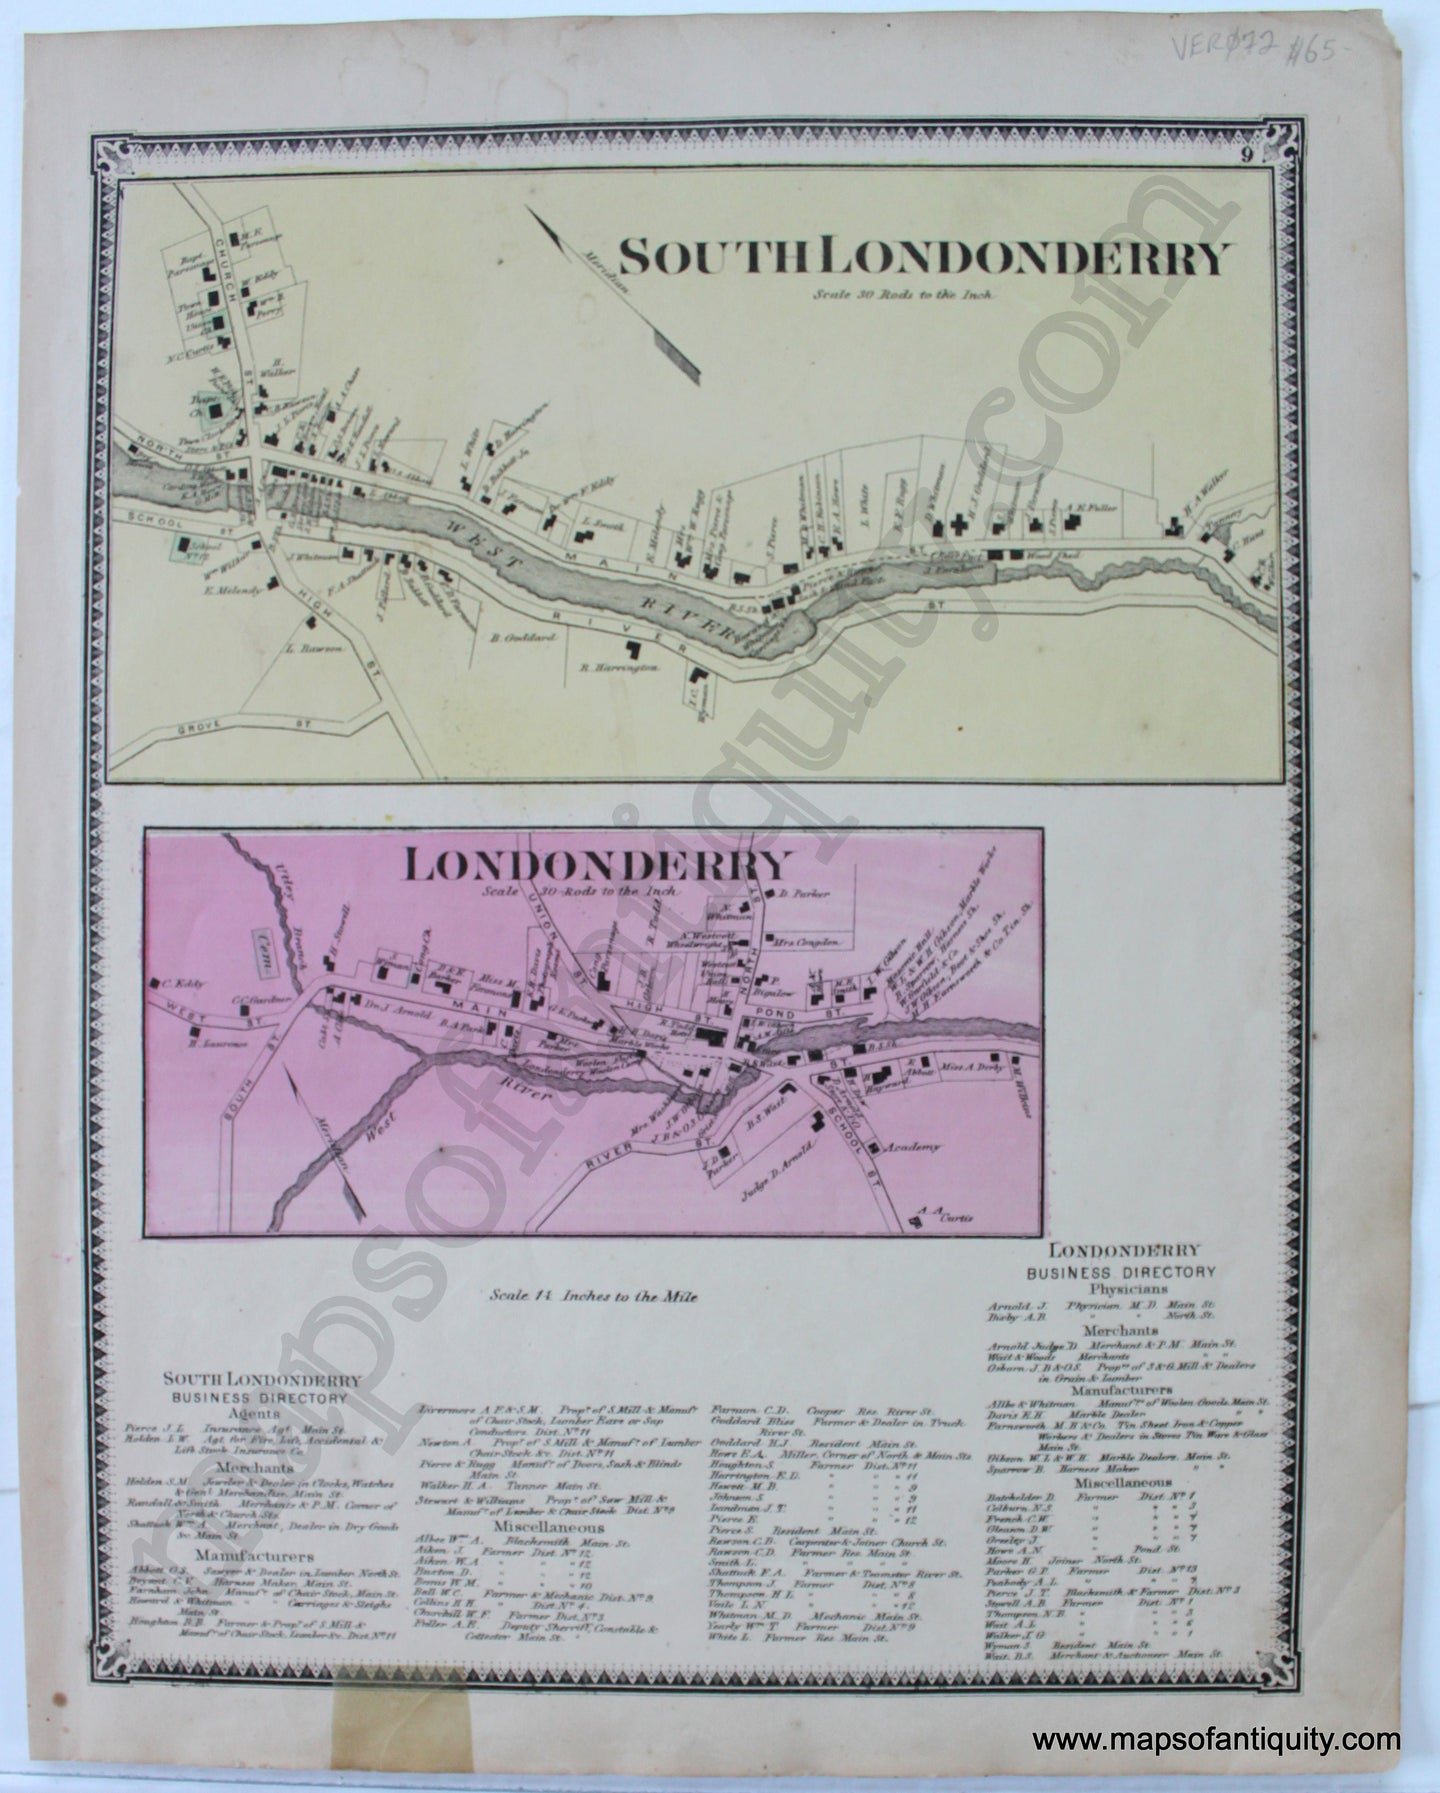 Antique-Map-South-Londonderry-Londonderry-VT-Vermont-Maps-of-Antiquity